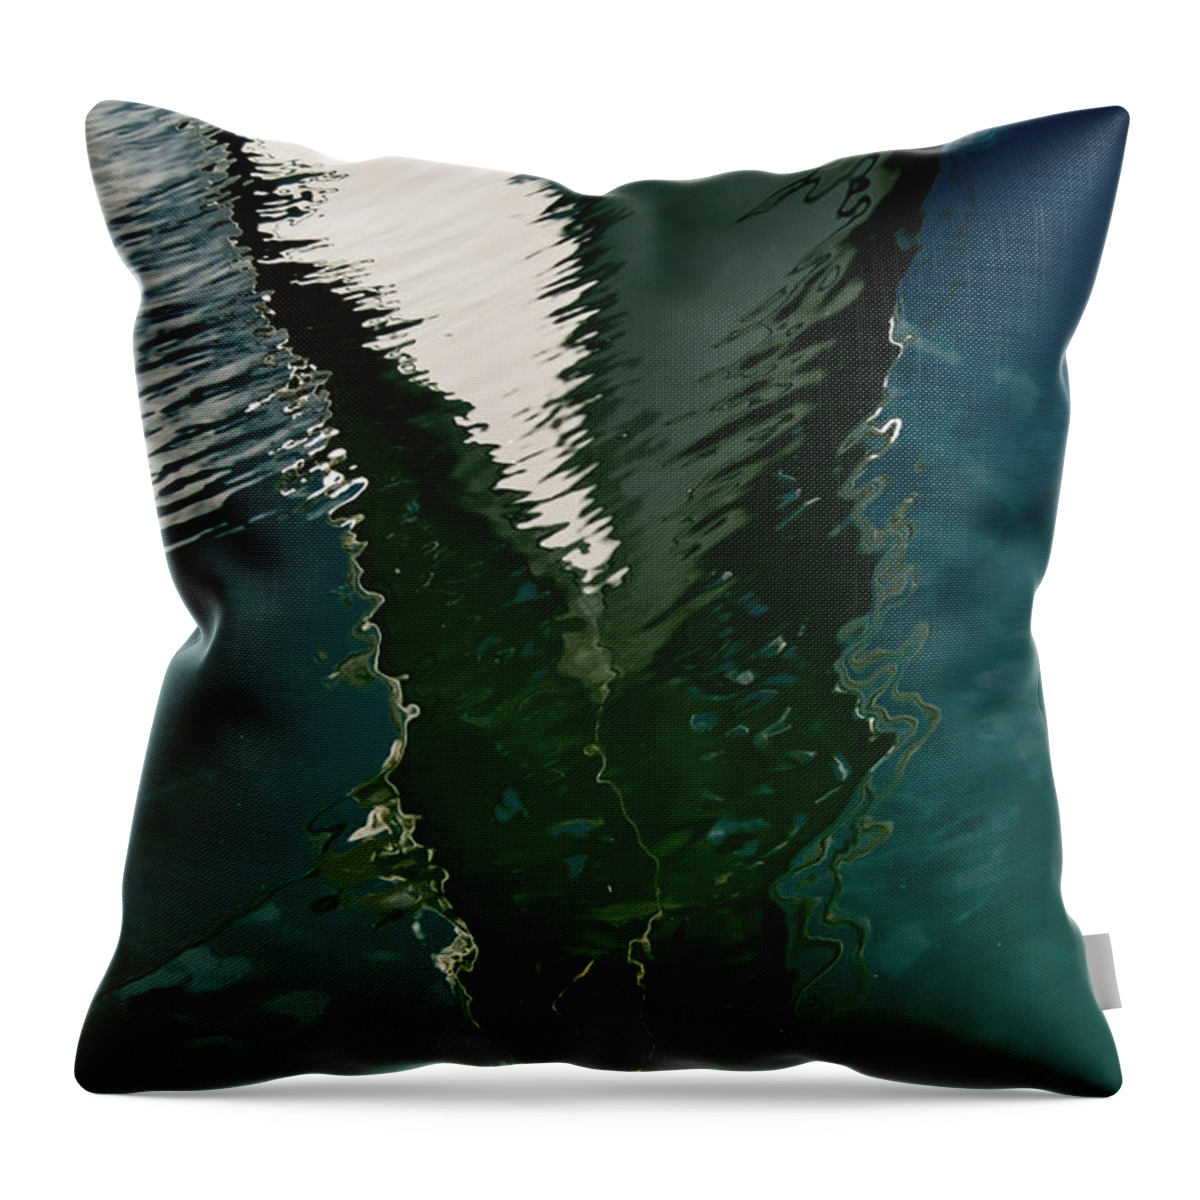 Sailboat Throw Pillow featuring the photograph Abstract Sailboat Reflection by Jani Freimann